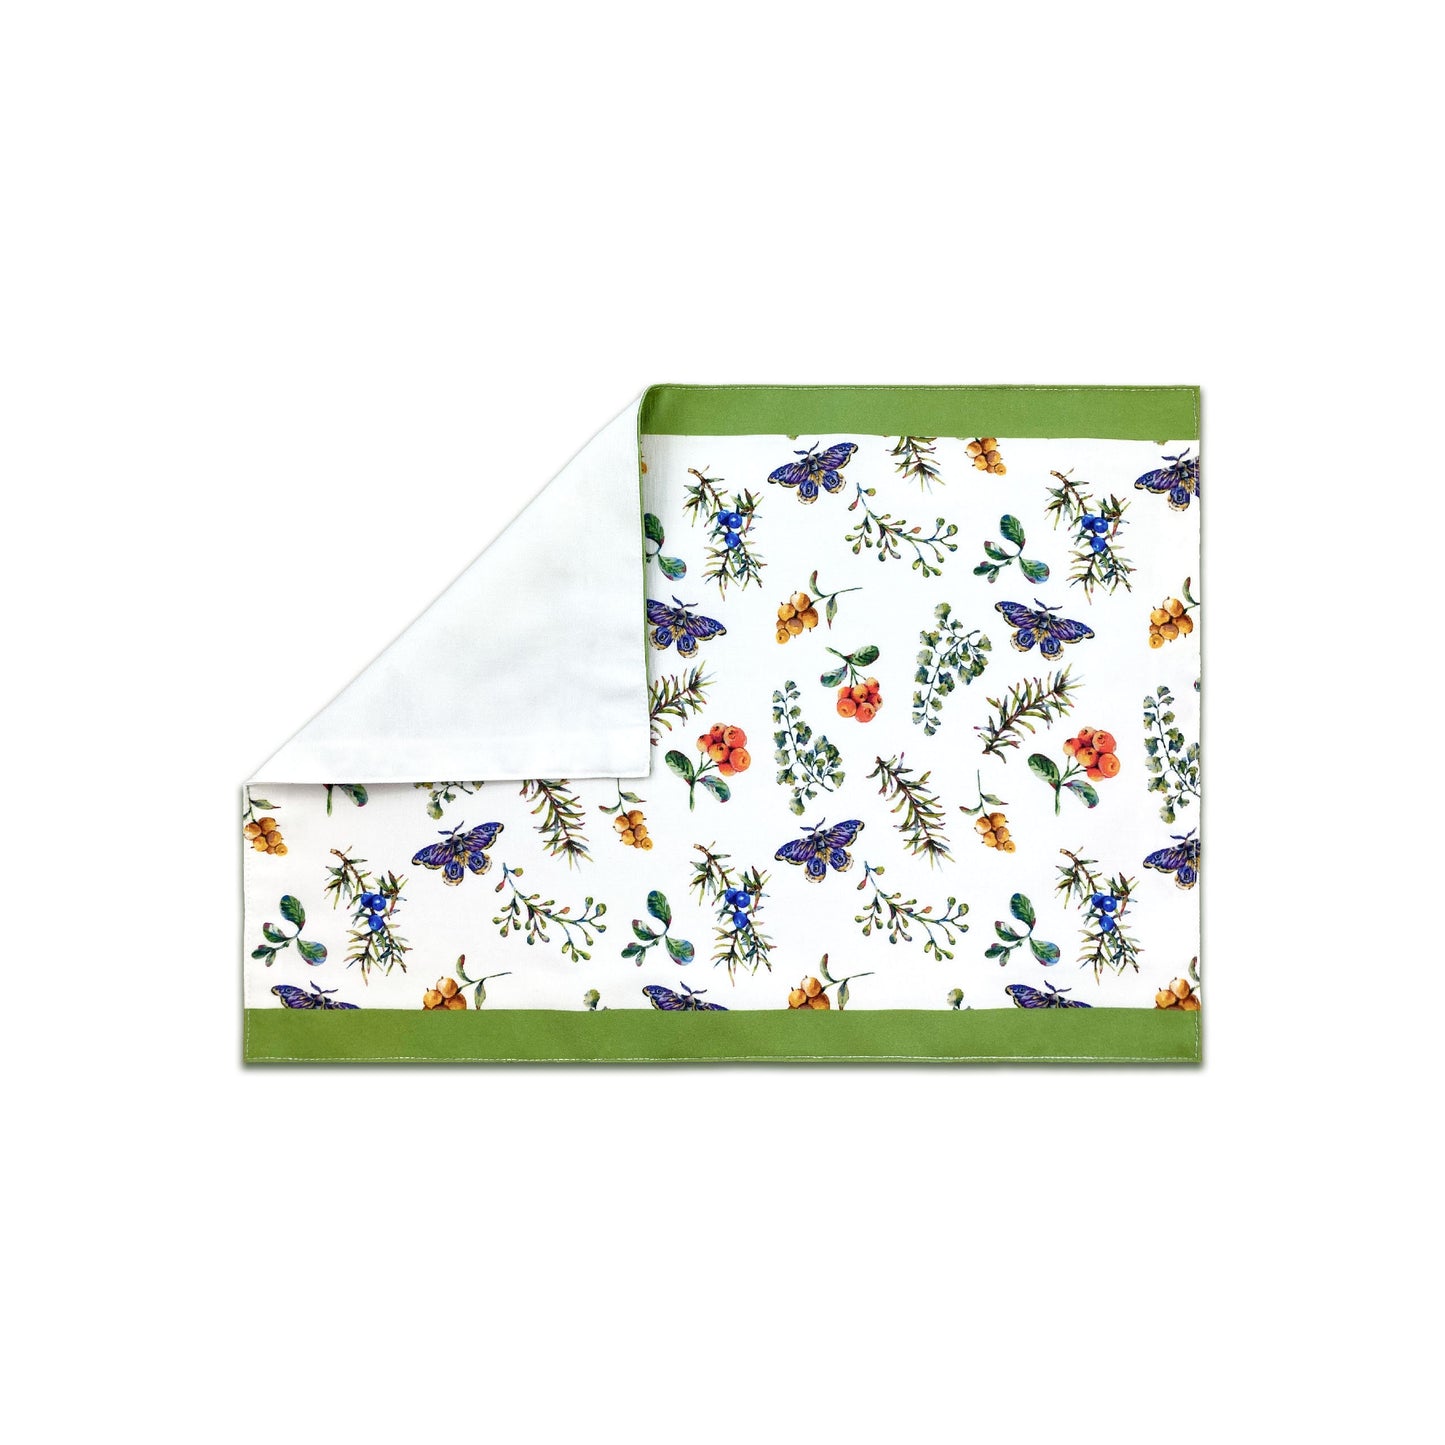 Set of 4 floral forest Placemat, butterflies with fir branches, berries and fern pattern, Machine washable Placemat